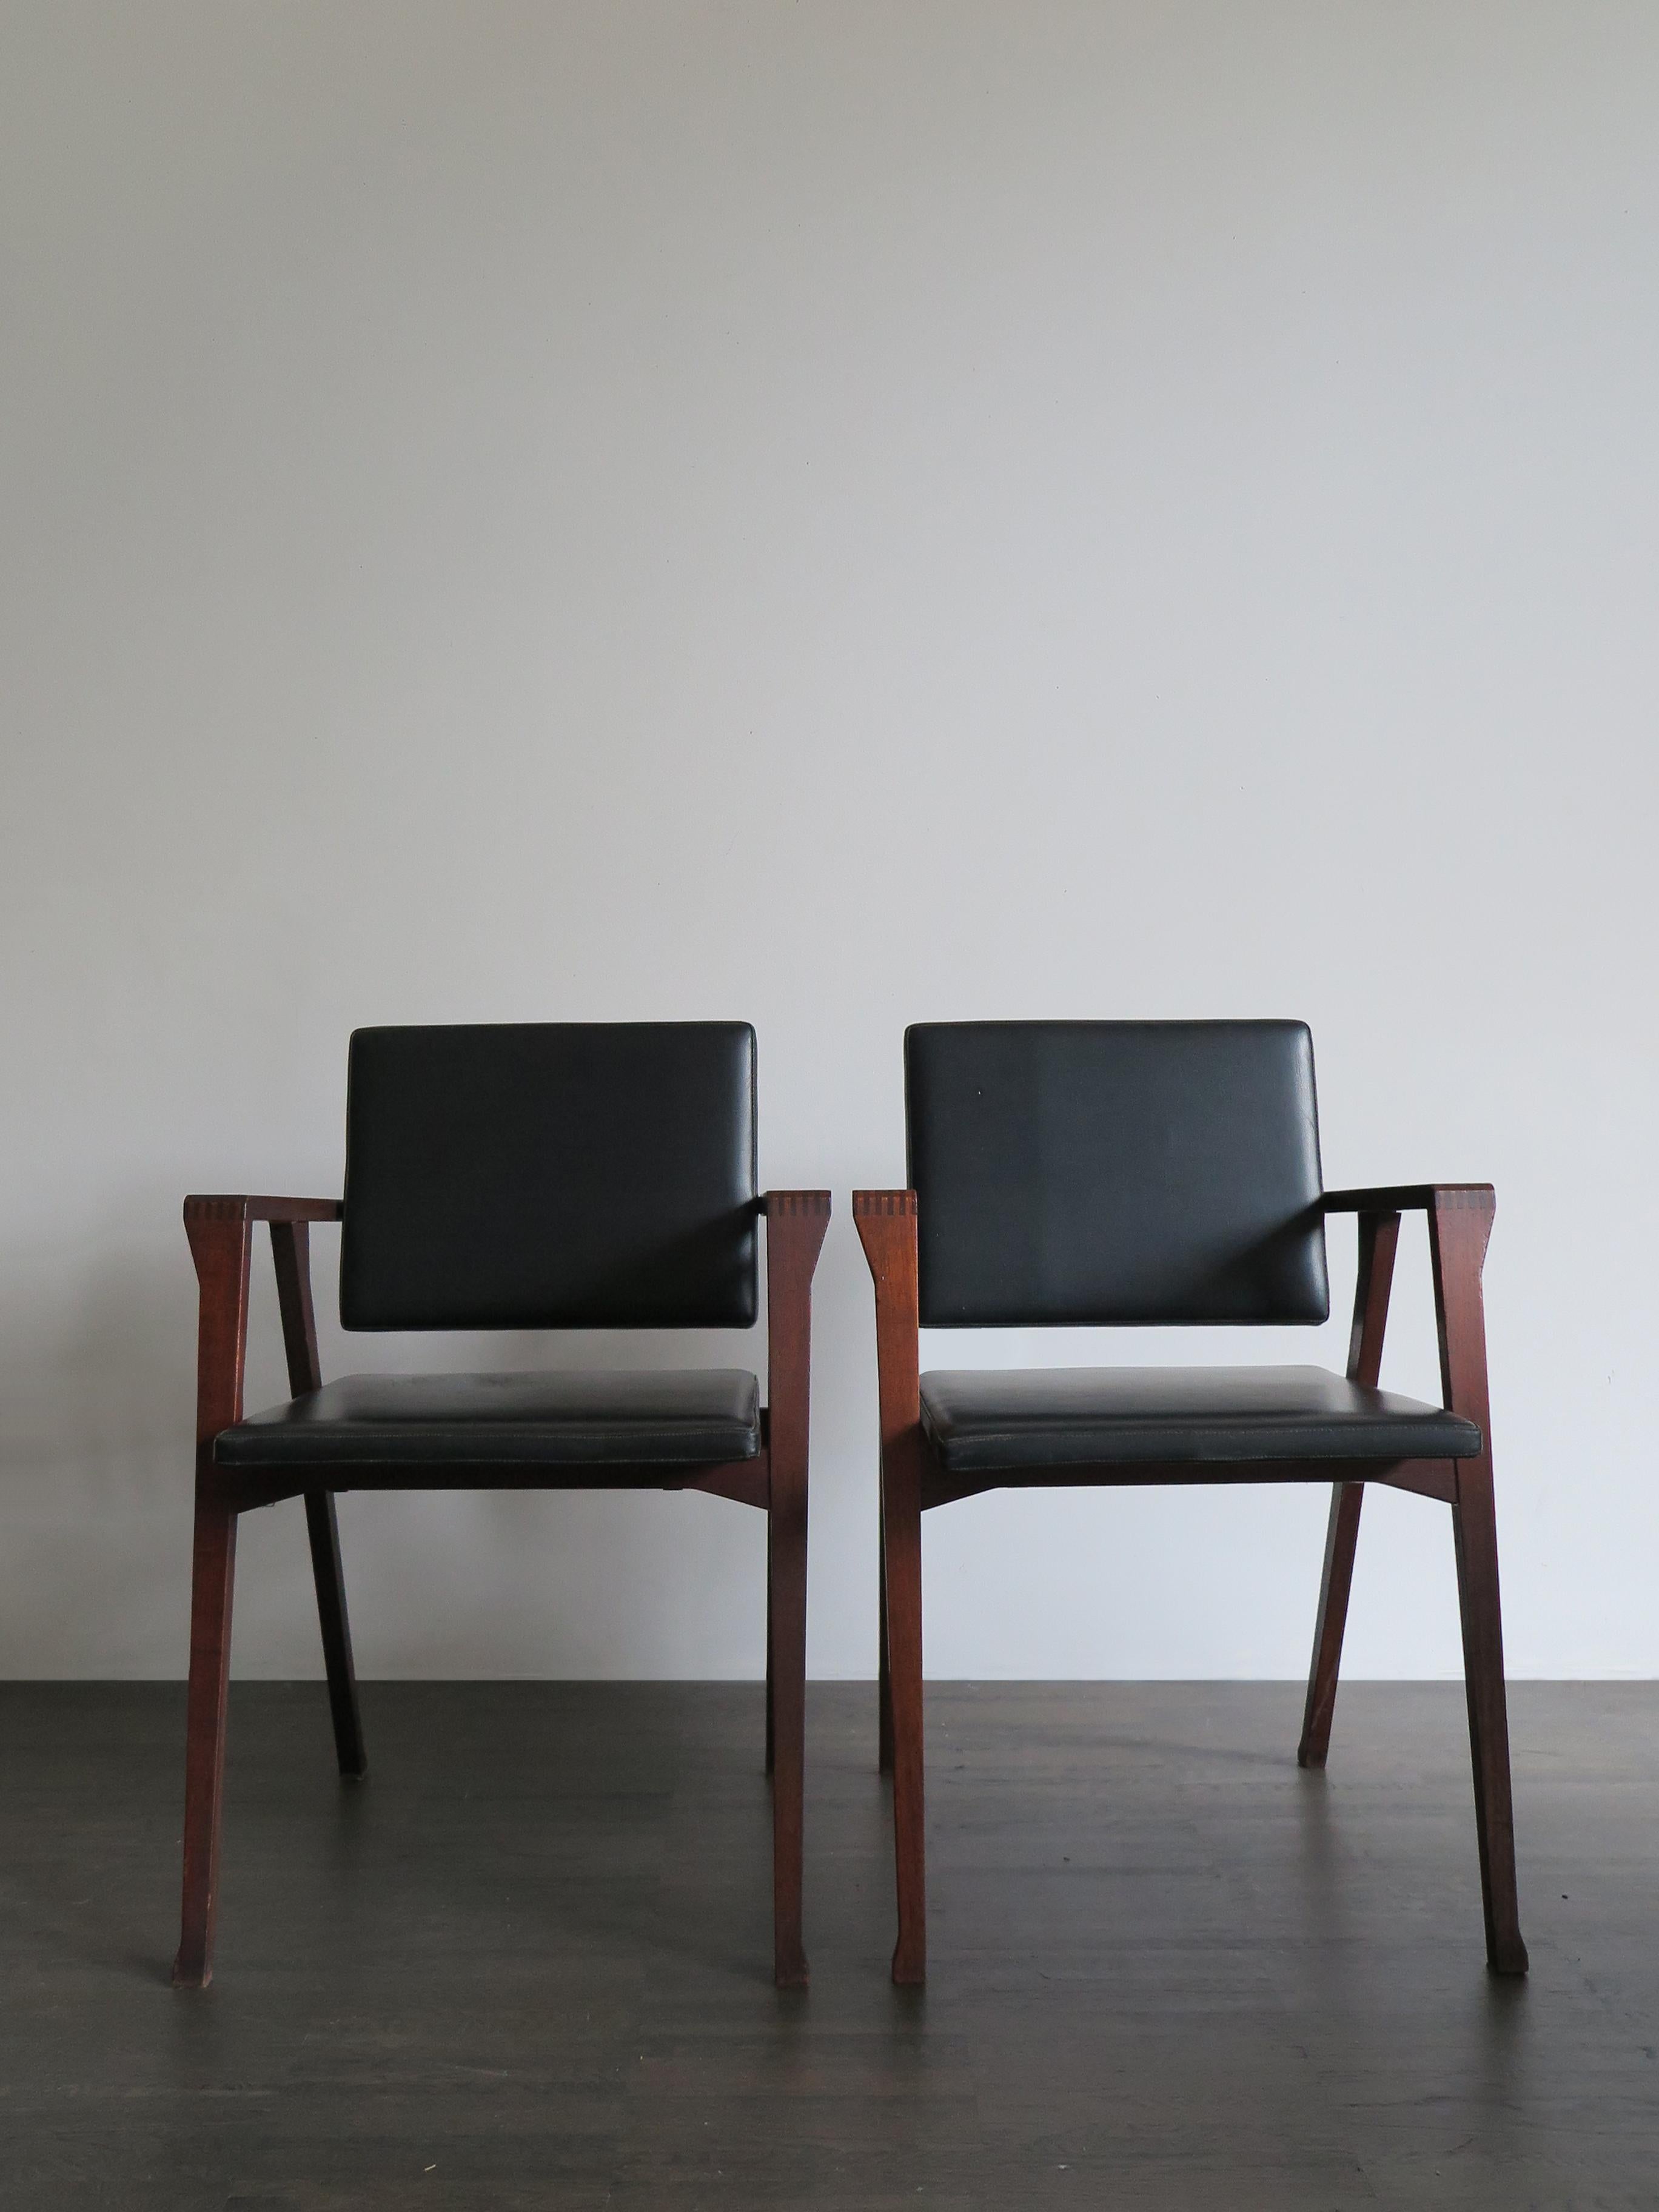 Couple of famous and amazing wood and leather armchairs model Luisa designed by Italian designer Franco Albini and produced by Poggi Pavia from 1955.
Please note that the items are original of the period and this shows normal signs of age and